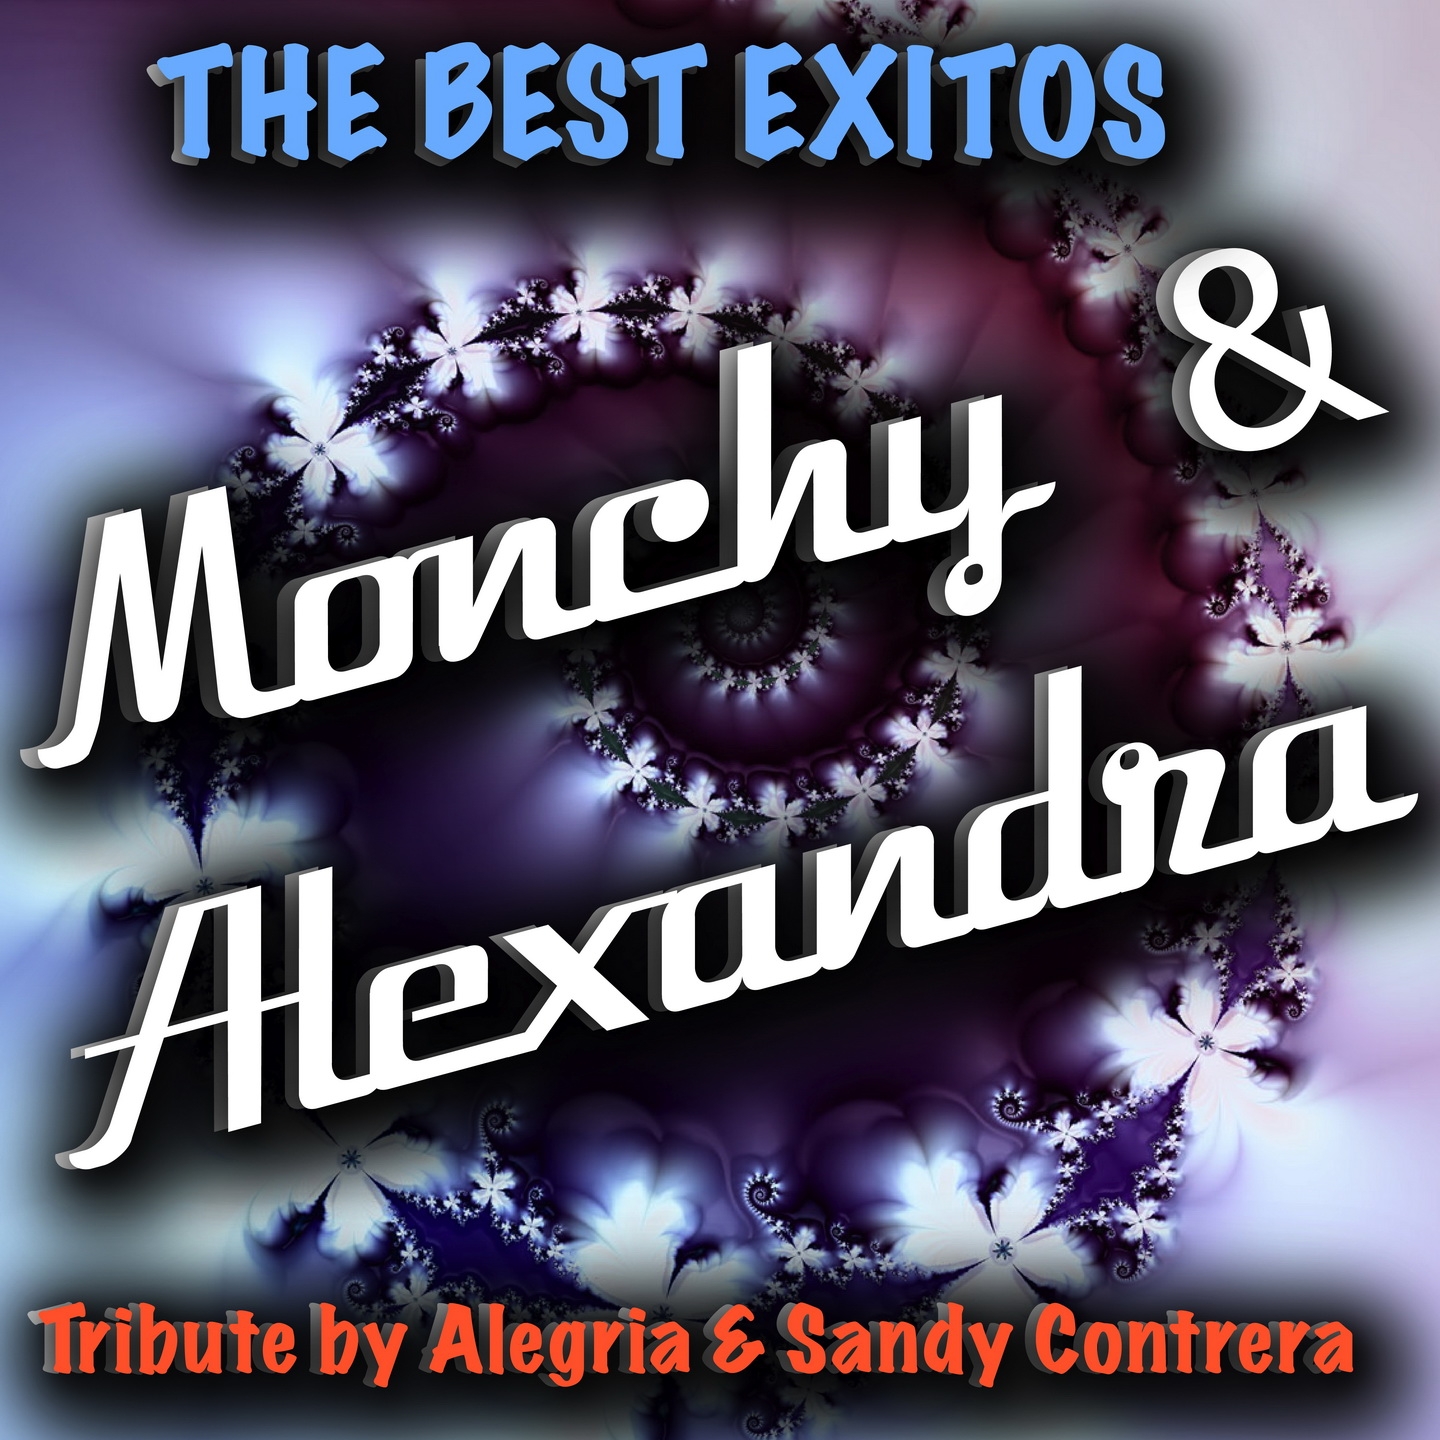 The Best Exitos: Monchy & Alexandra (Tribute By Alegria and Sandy Contrera)